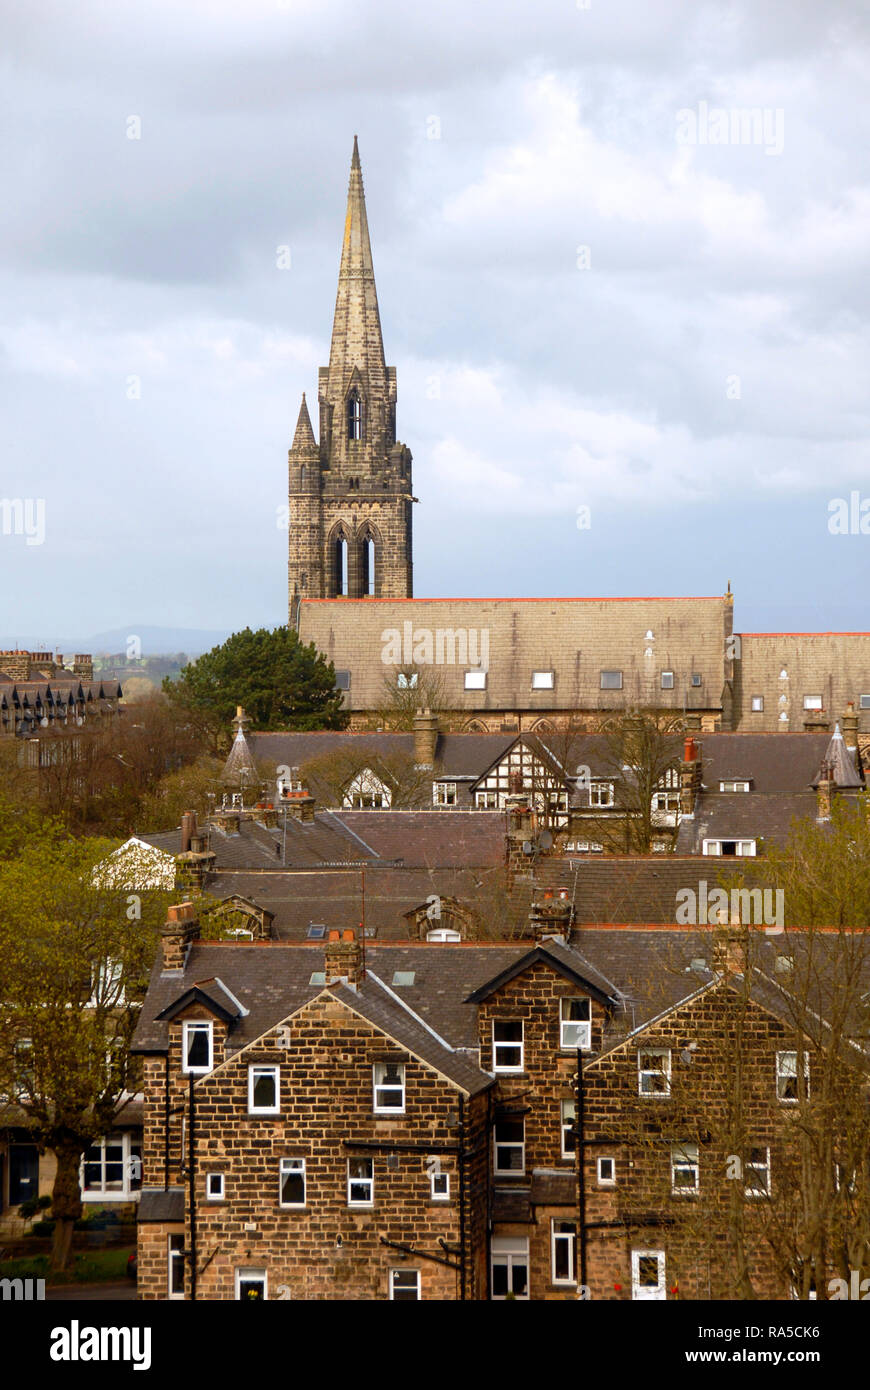 Church with steeple, seen towering over residential property,  Harrogate, Yorkshire, England Stock Photo